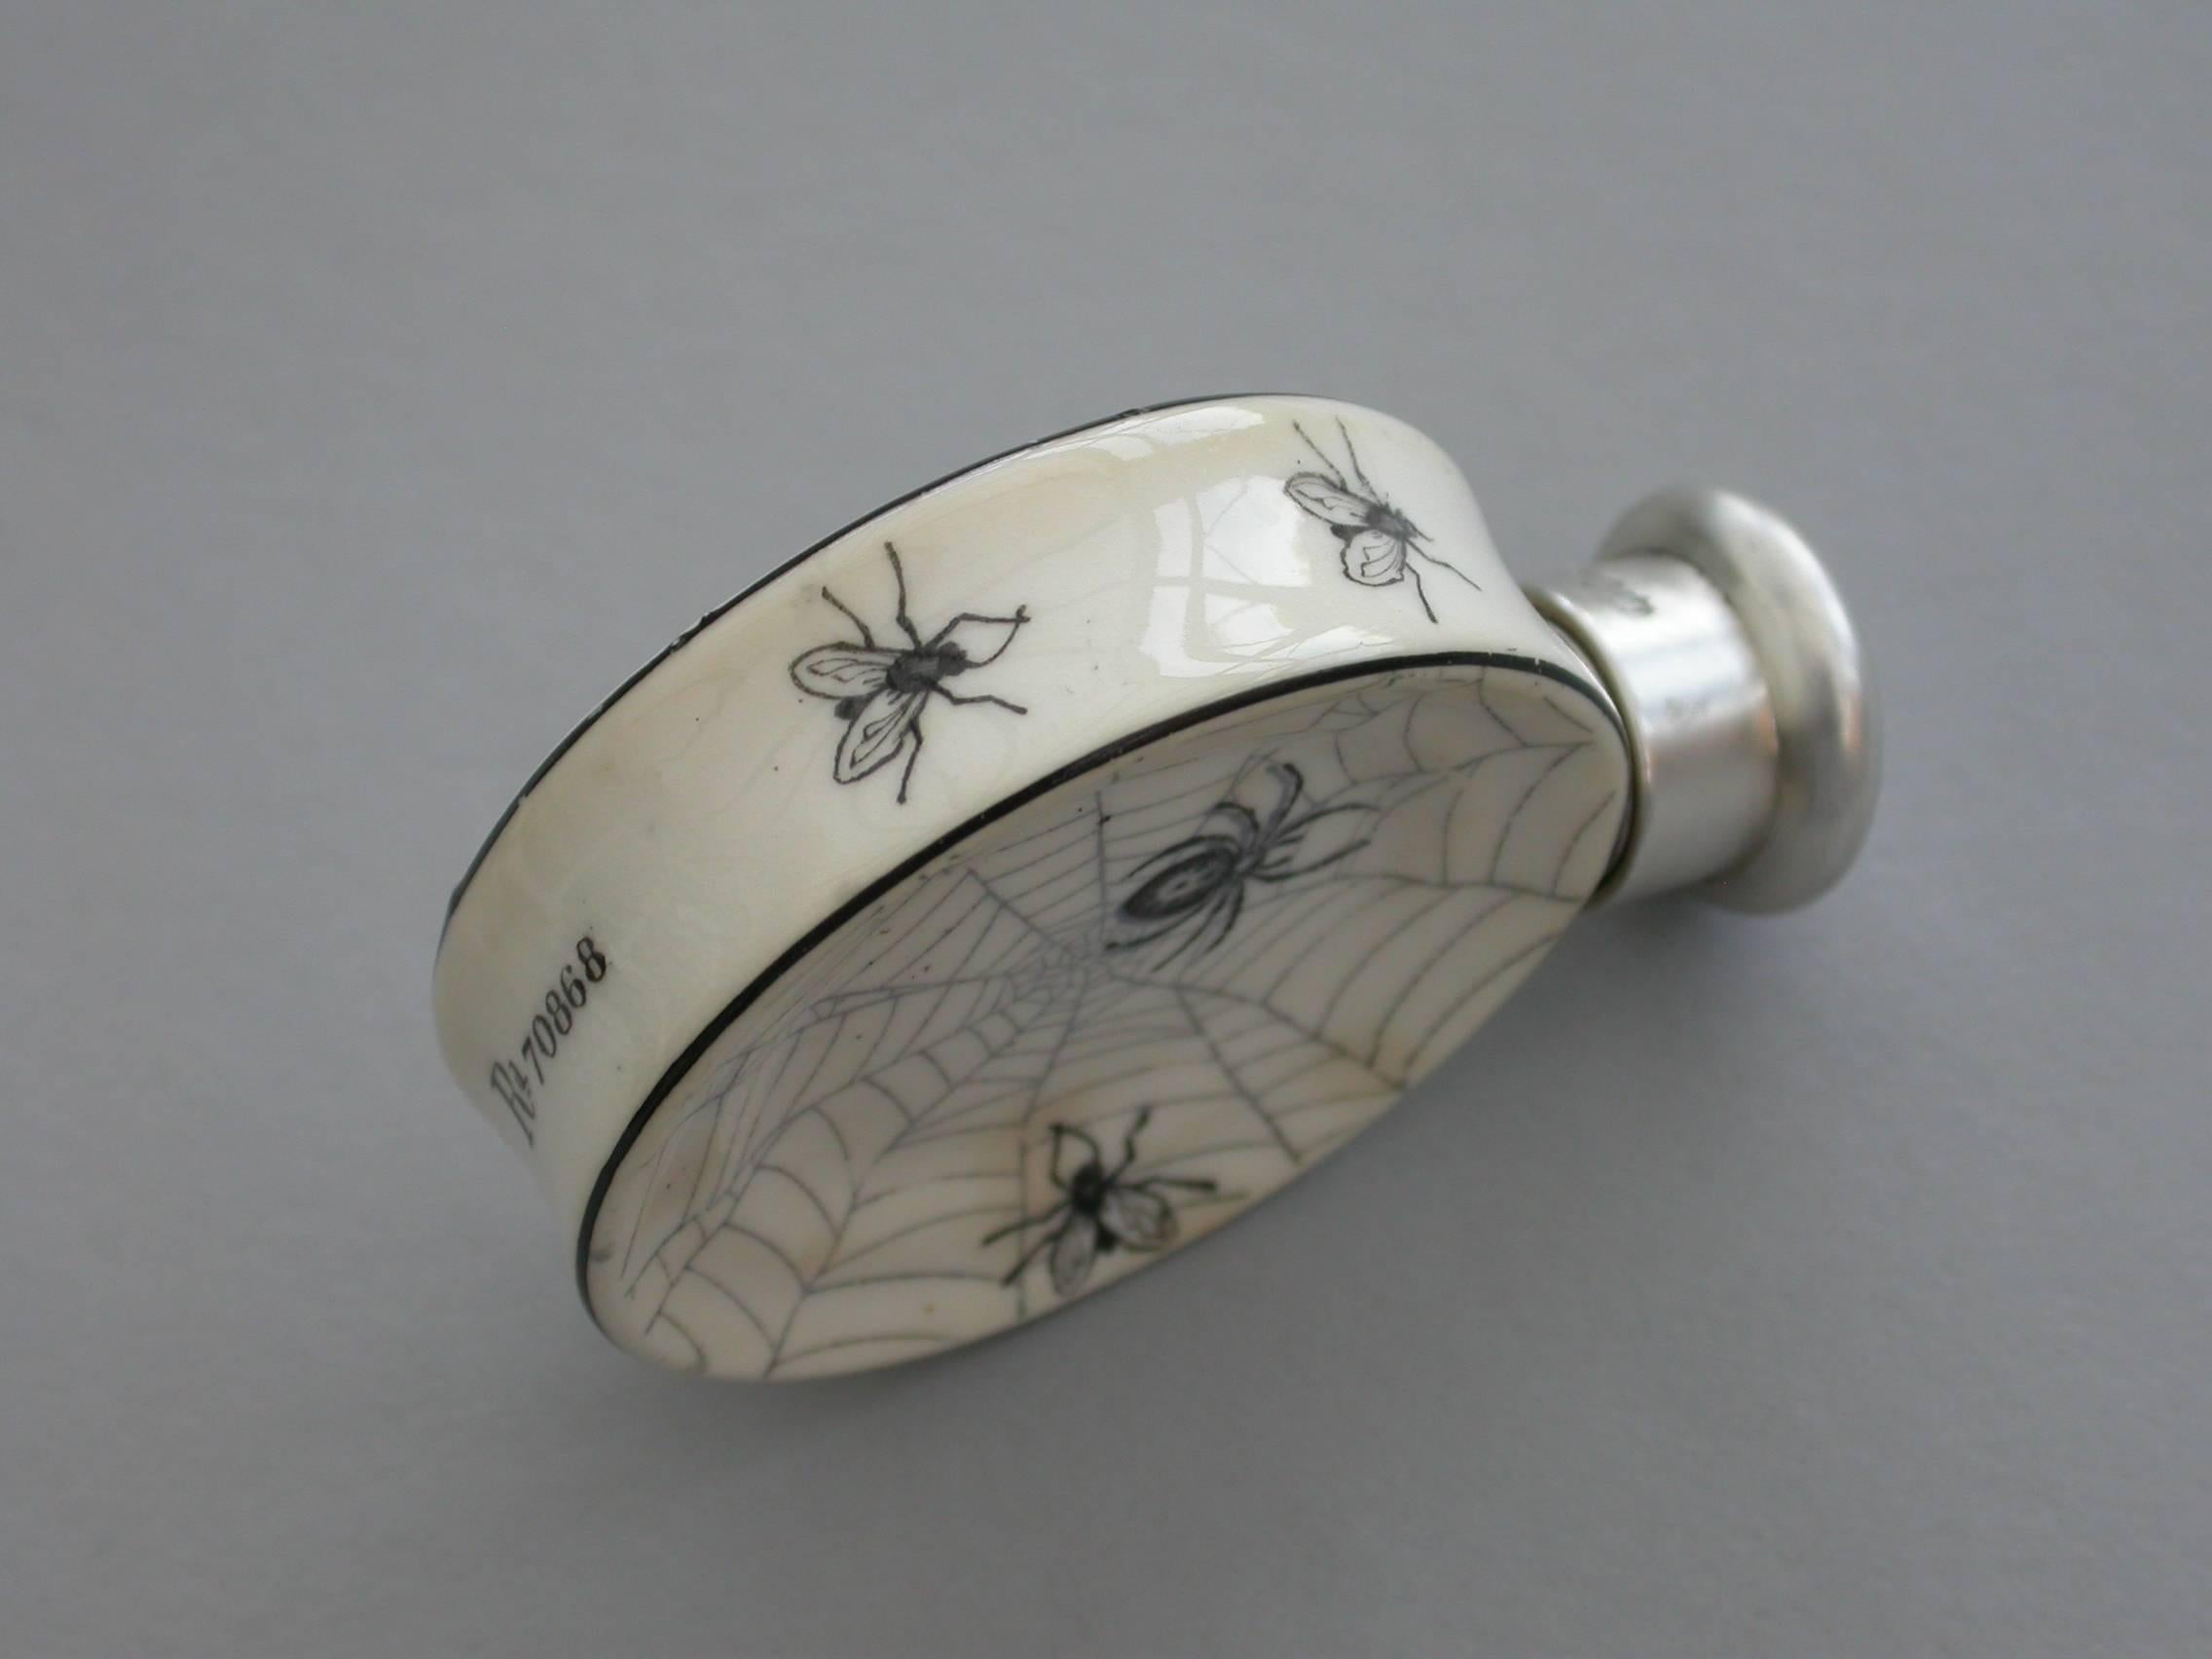 An extremely rare Victorian silver mounted porcelain scent bottle of dished circular form, decorated in monochrome enamel with spiders webs and fly's. The base with the registered design number 70868. Hallmarked silver screw-off top.

By Sampson